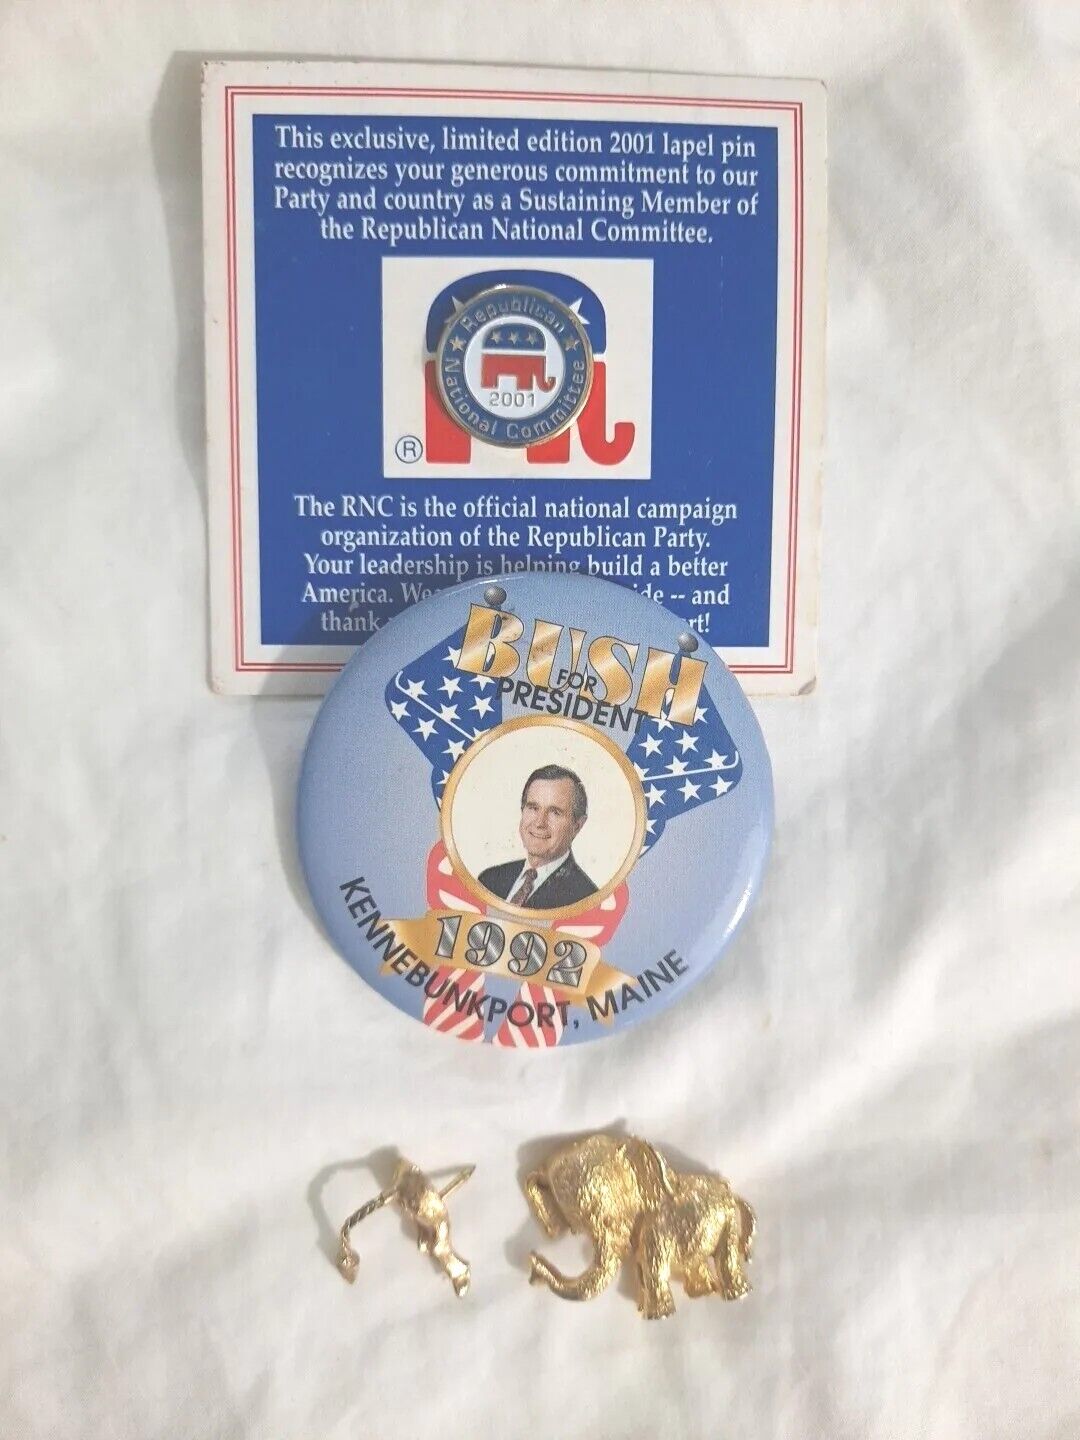 1992 BUSH For PRESIDENT pin, 2001 RNC PIN, Elephant And Donkey Ass Pin. Vintage 